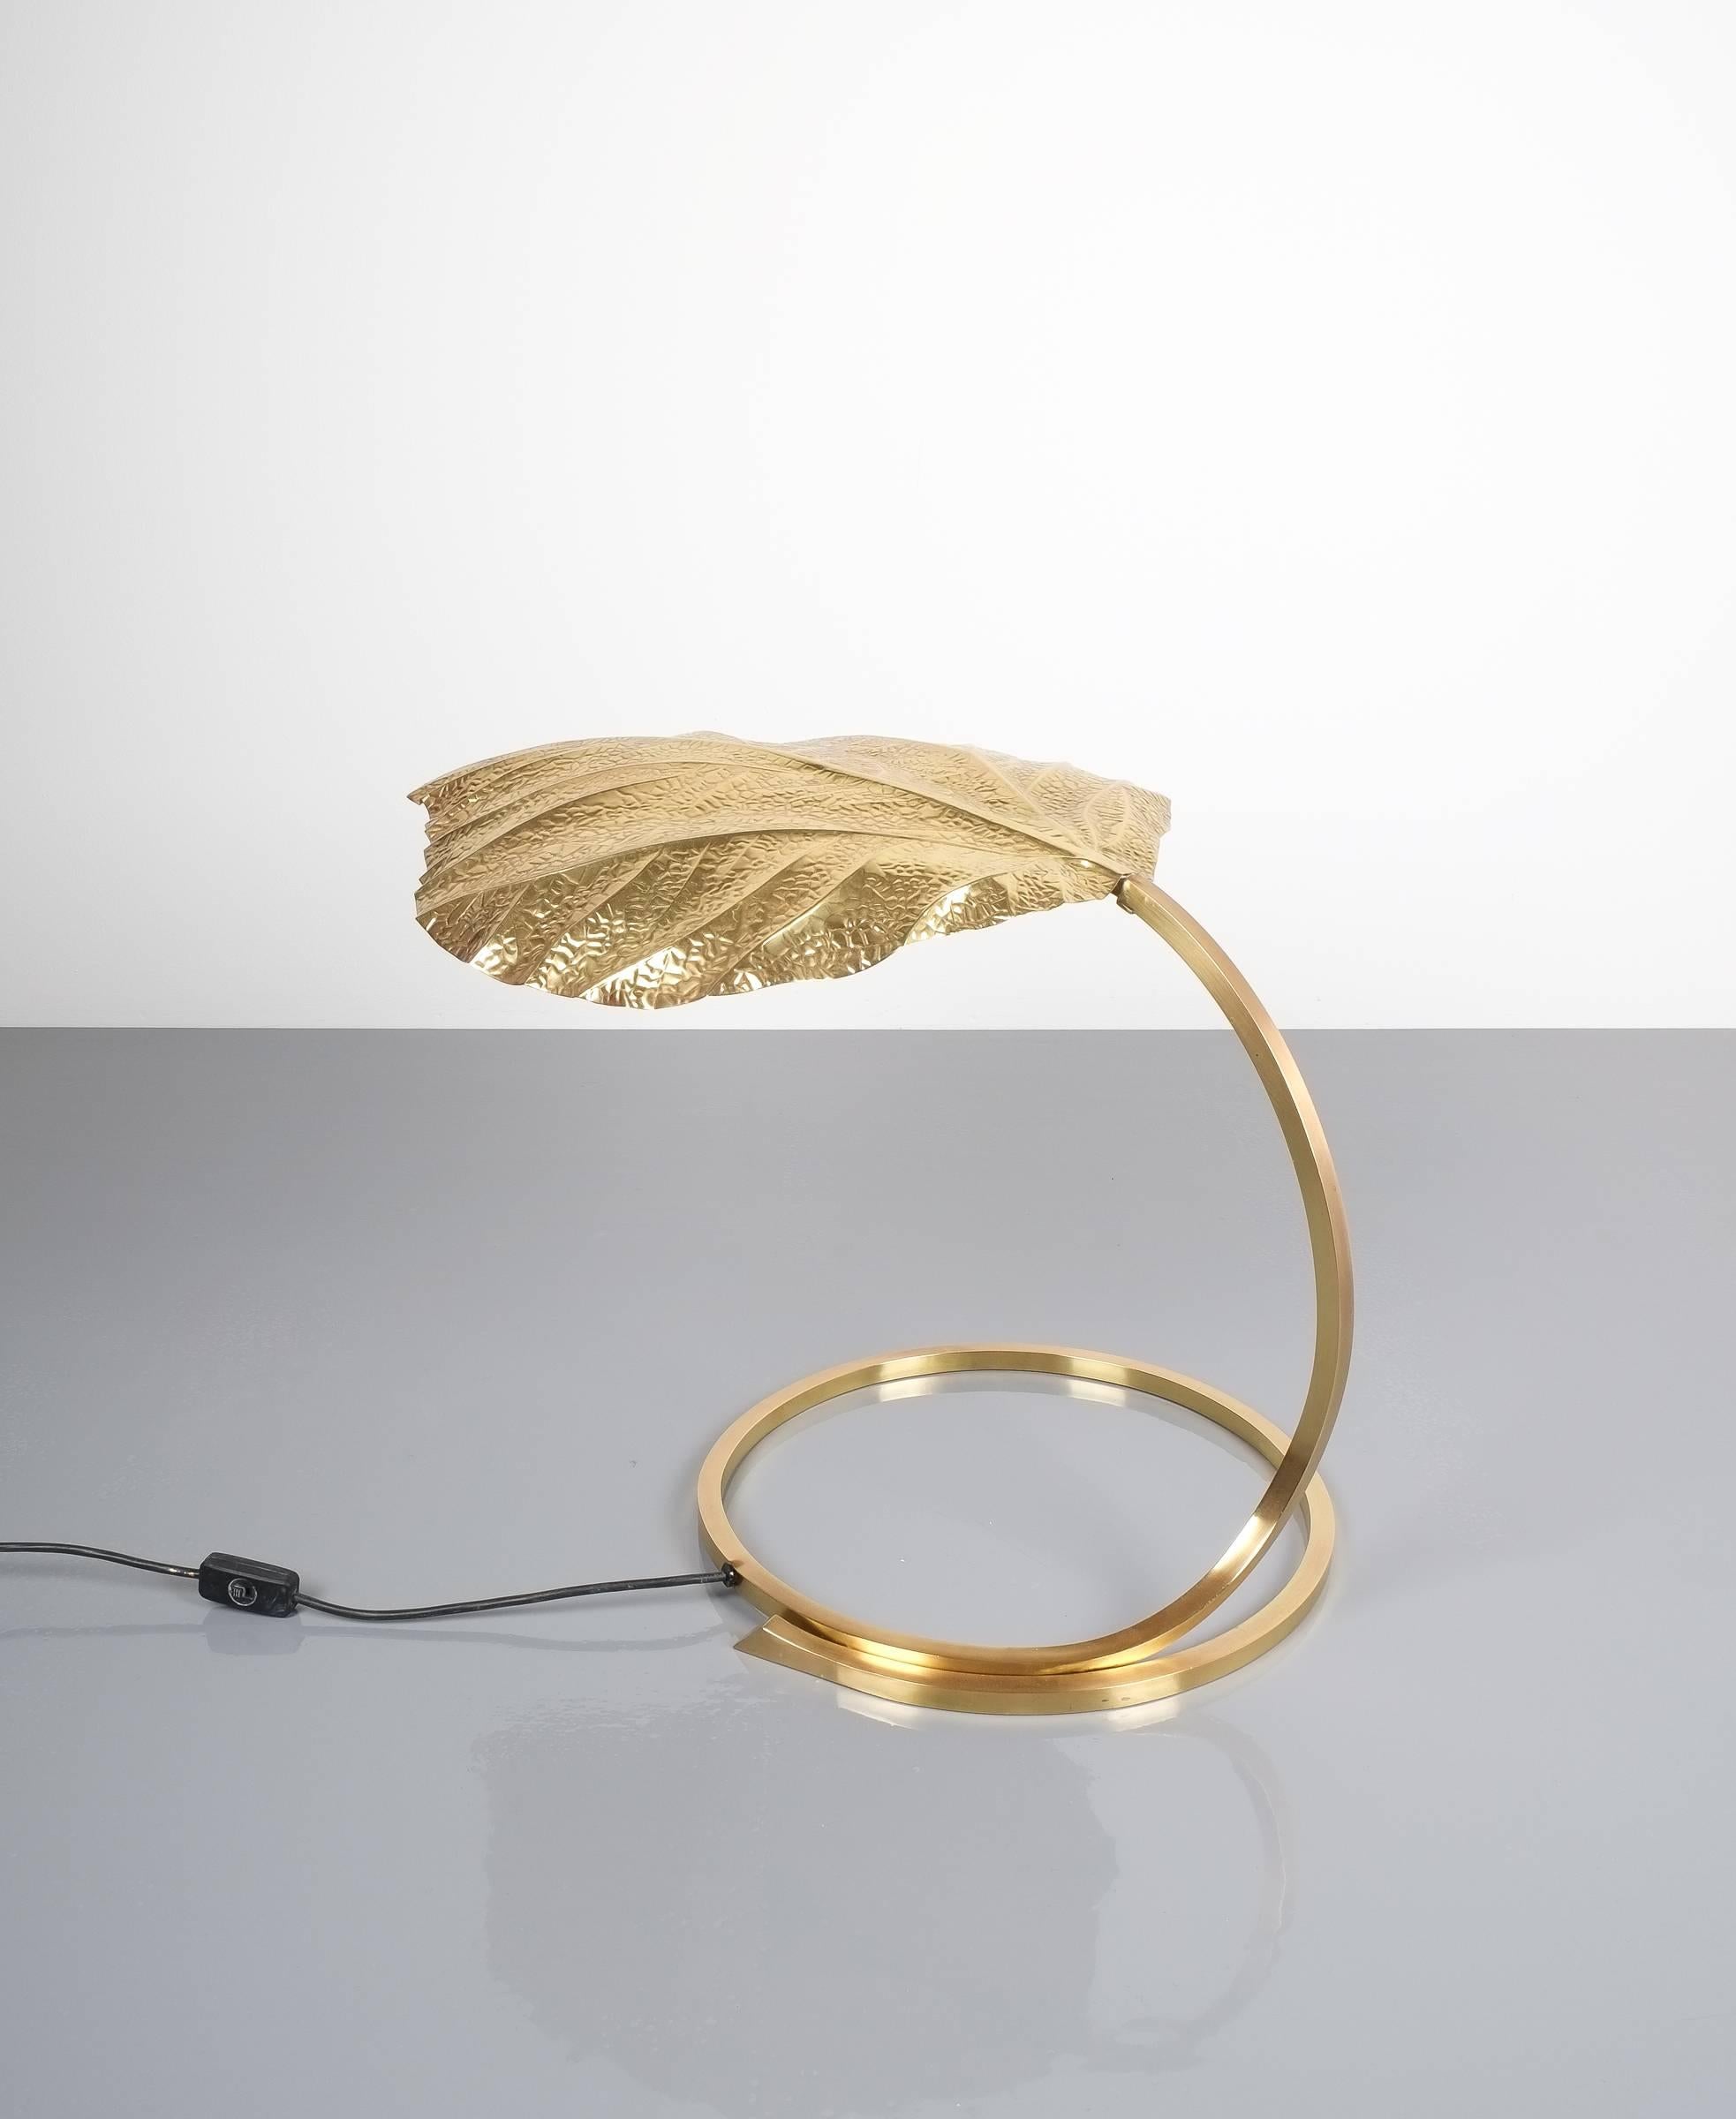 Excellent pair refurbished large table lights by Tomasso Barbi, Italy, 1970 featuring a giant hammered shiny brass rhubarb leaf on an elegantly bended brass base.
These pieces have been refurbished, newly polished and treated against tarnishing. It